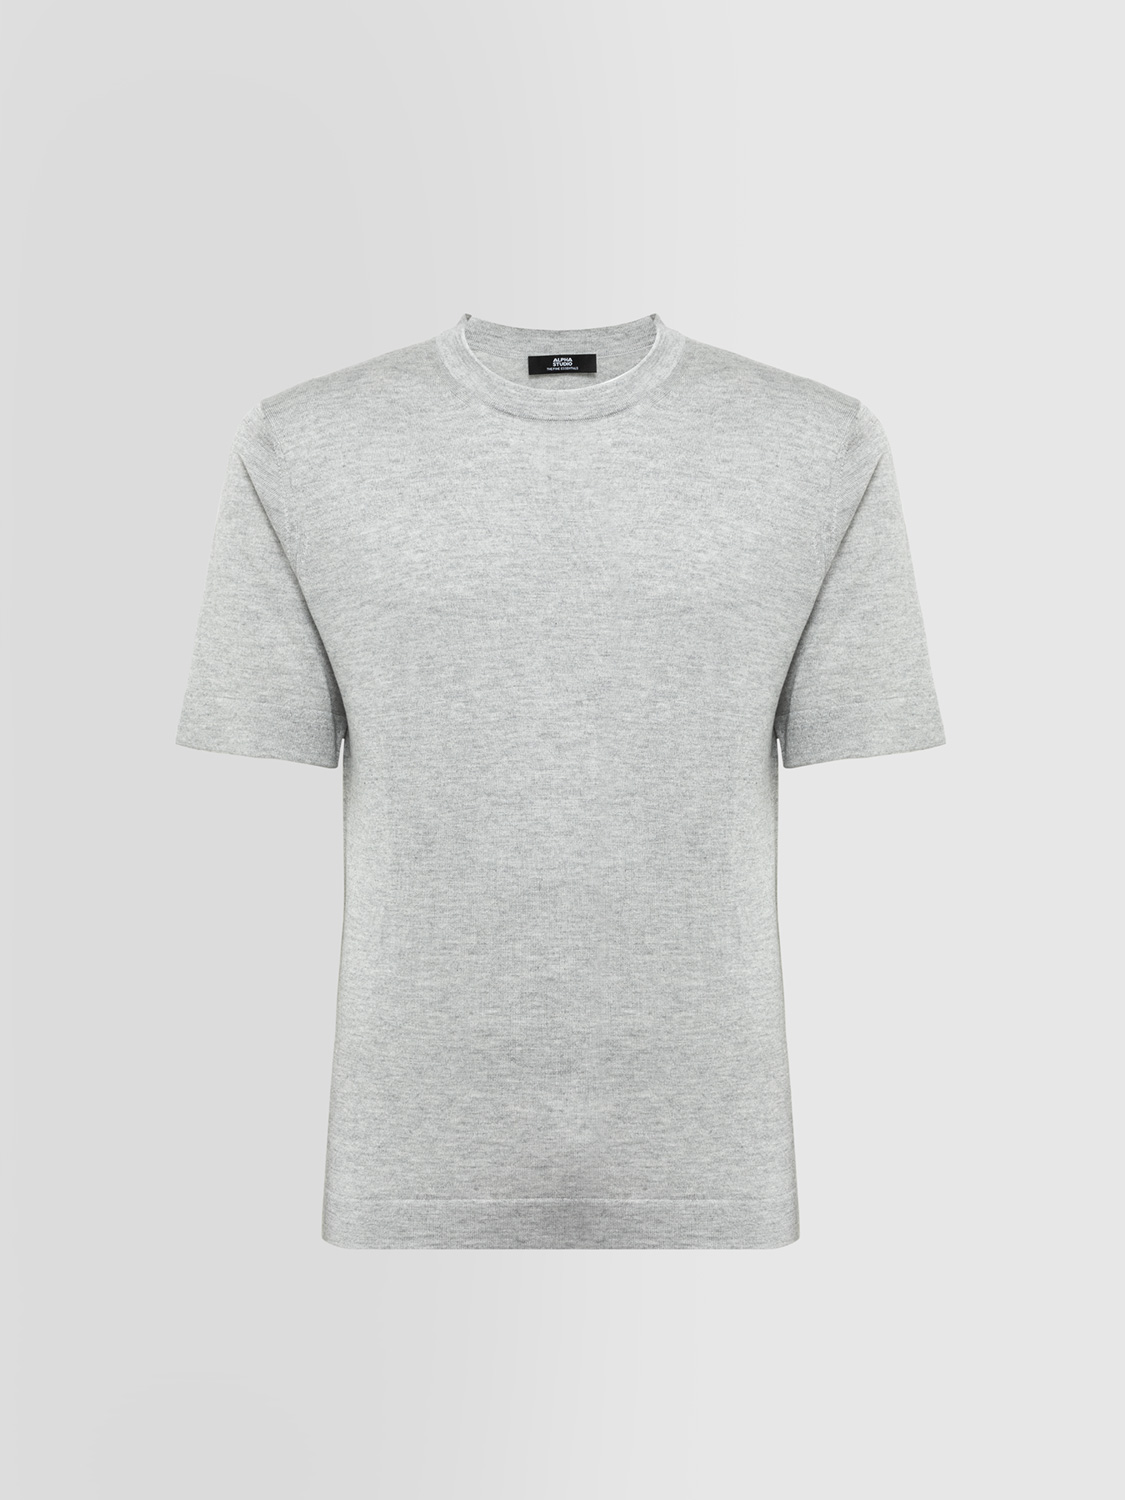 ALPHA STUDIO: T-SHIRT IN SILK AND CASHMERE